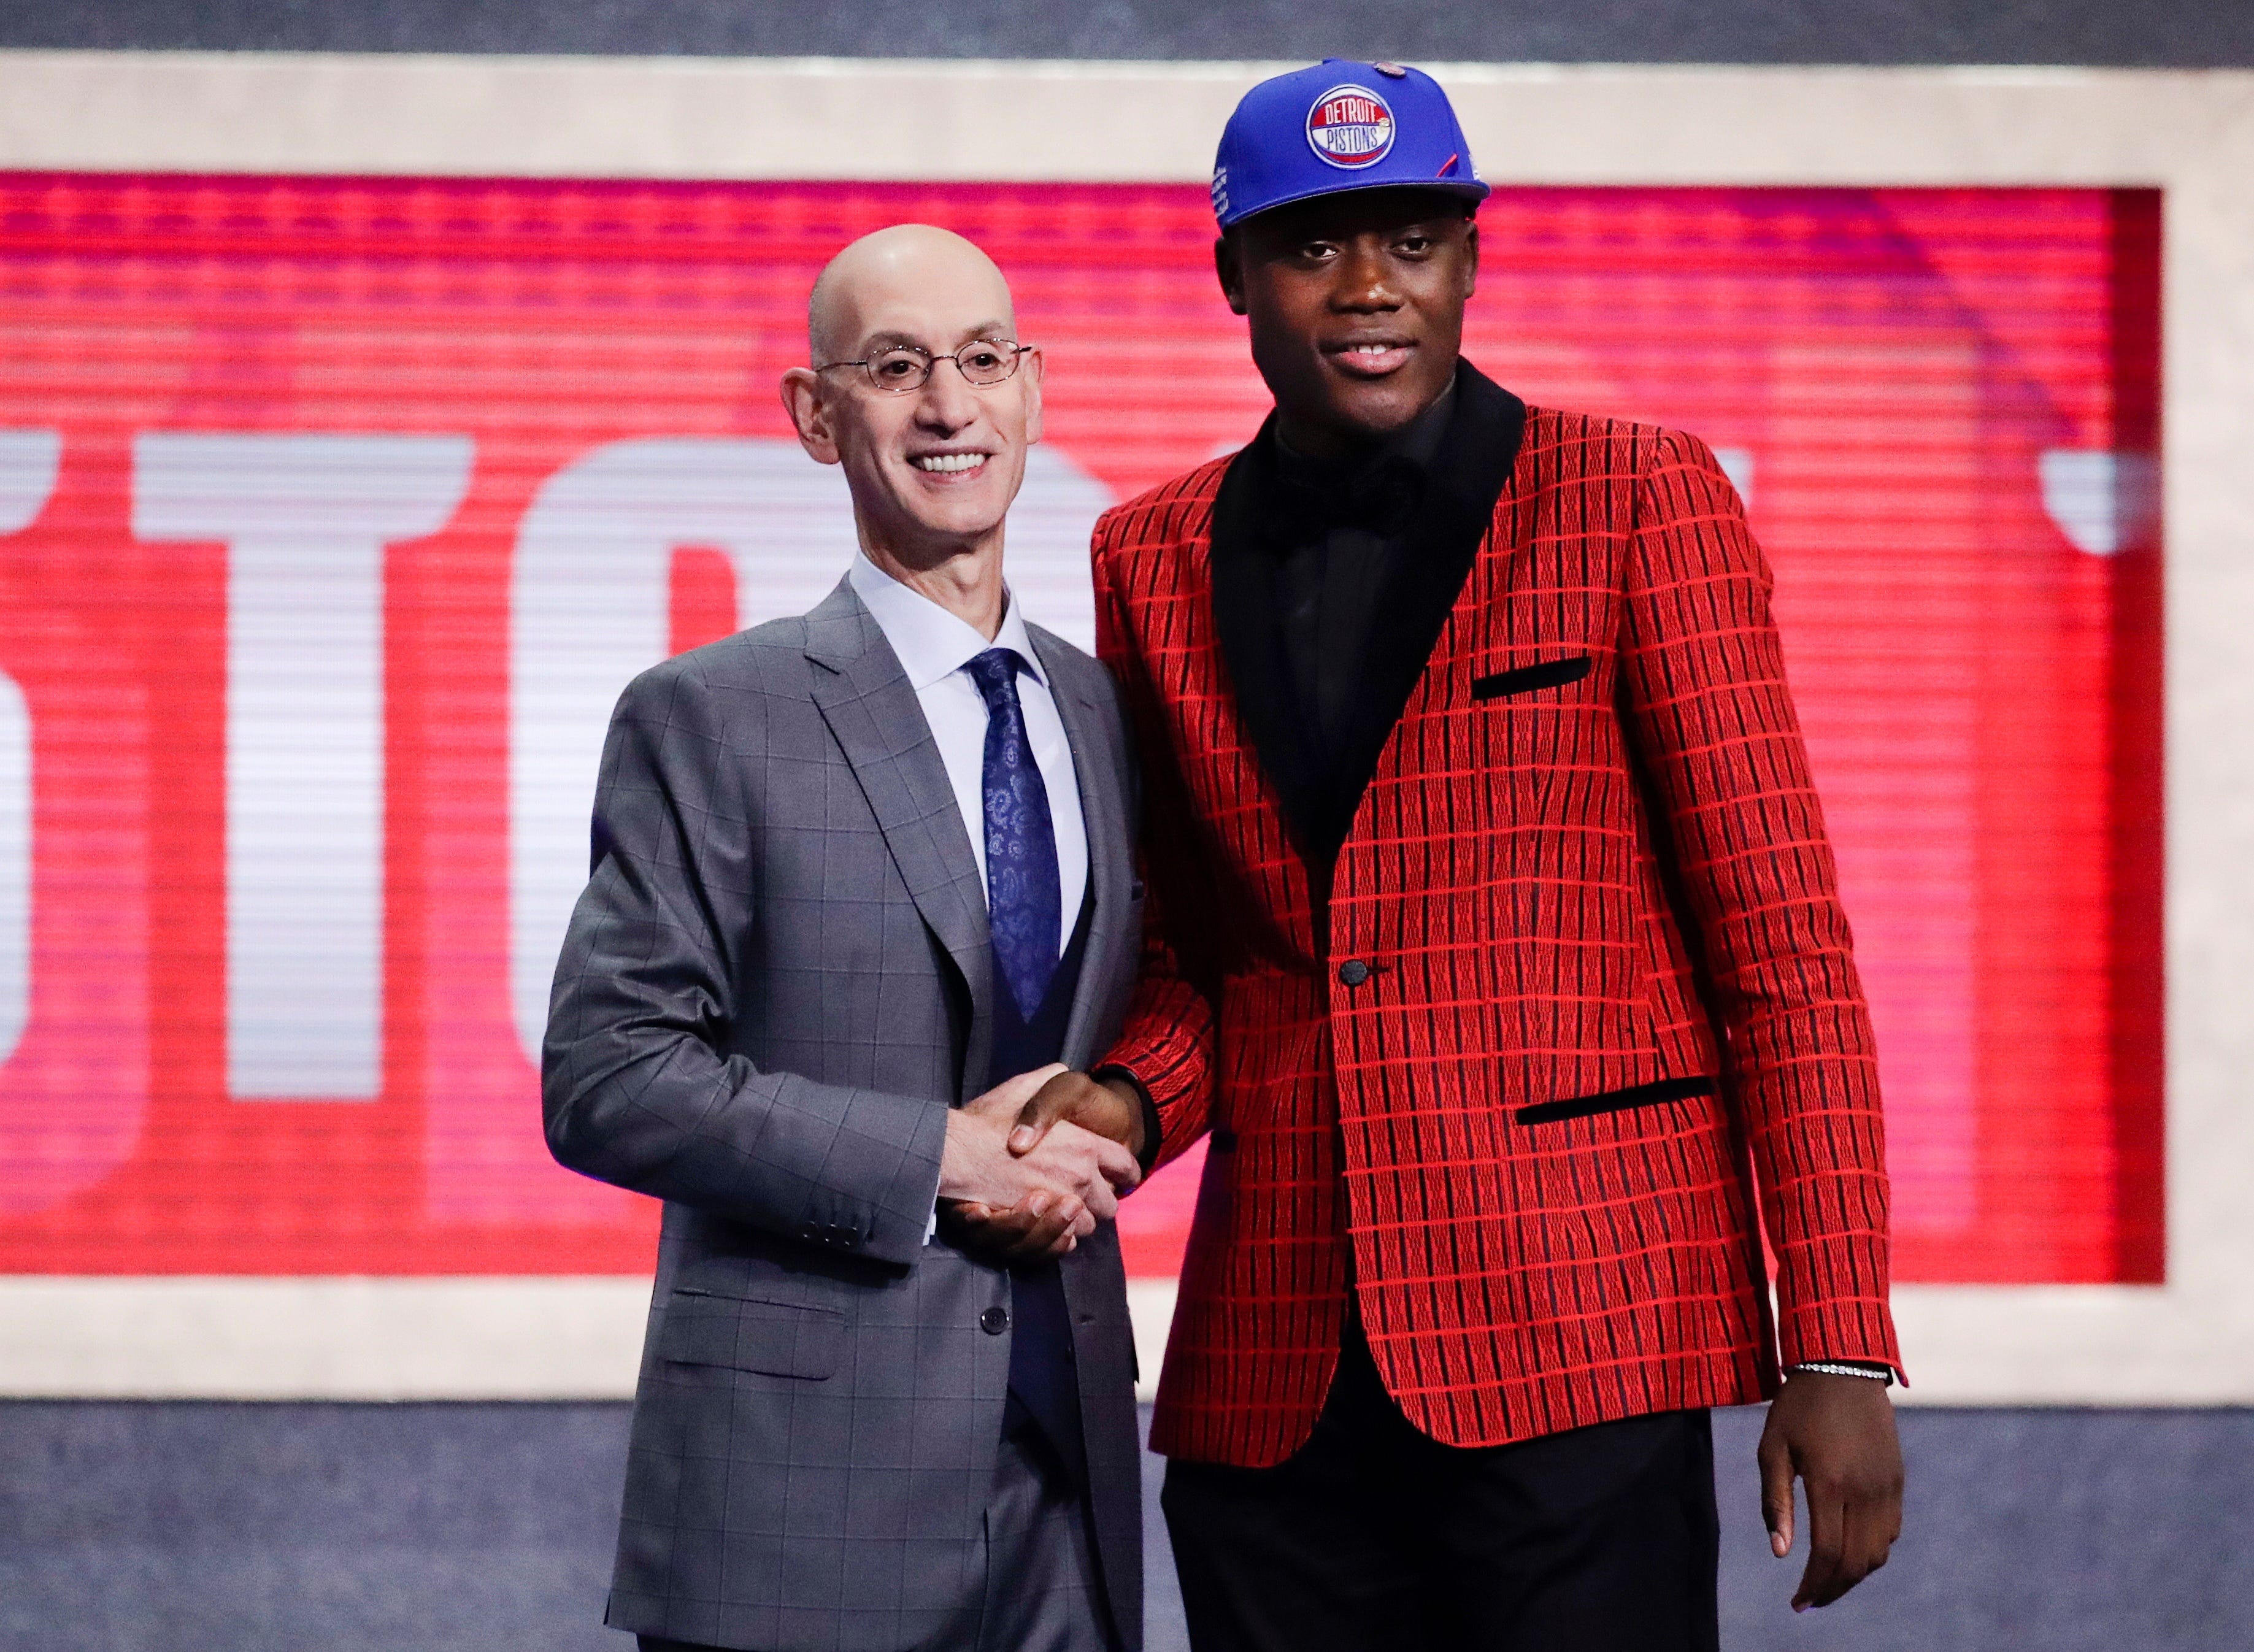 NBA Commissioner Adam Silver poses for photographs with Sekou Doumbouya after the Detroit Pistons selected him.